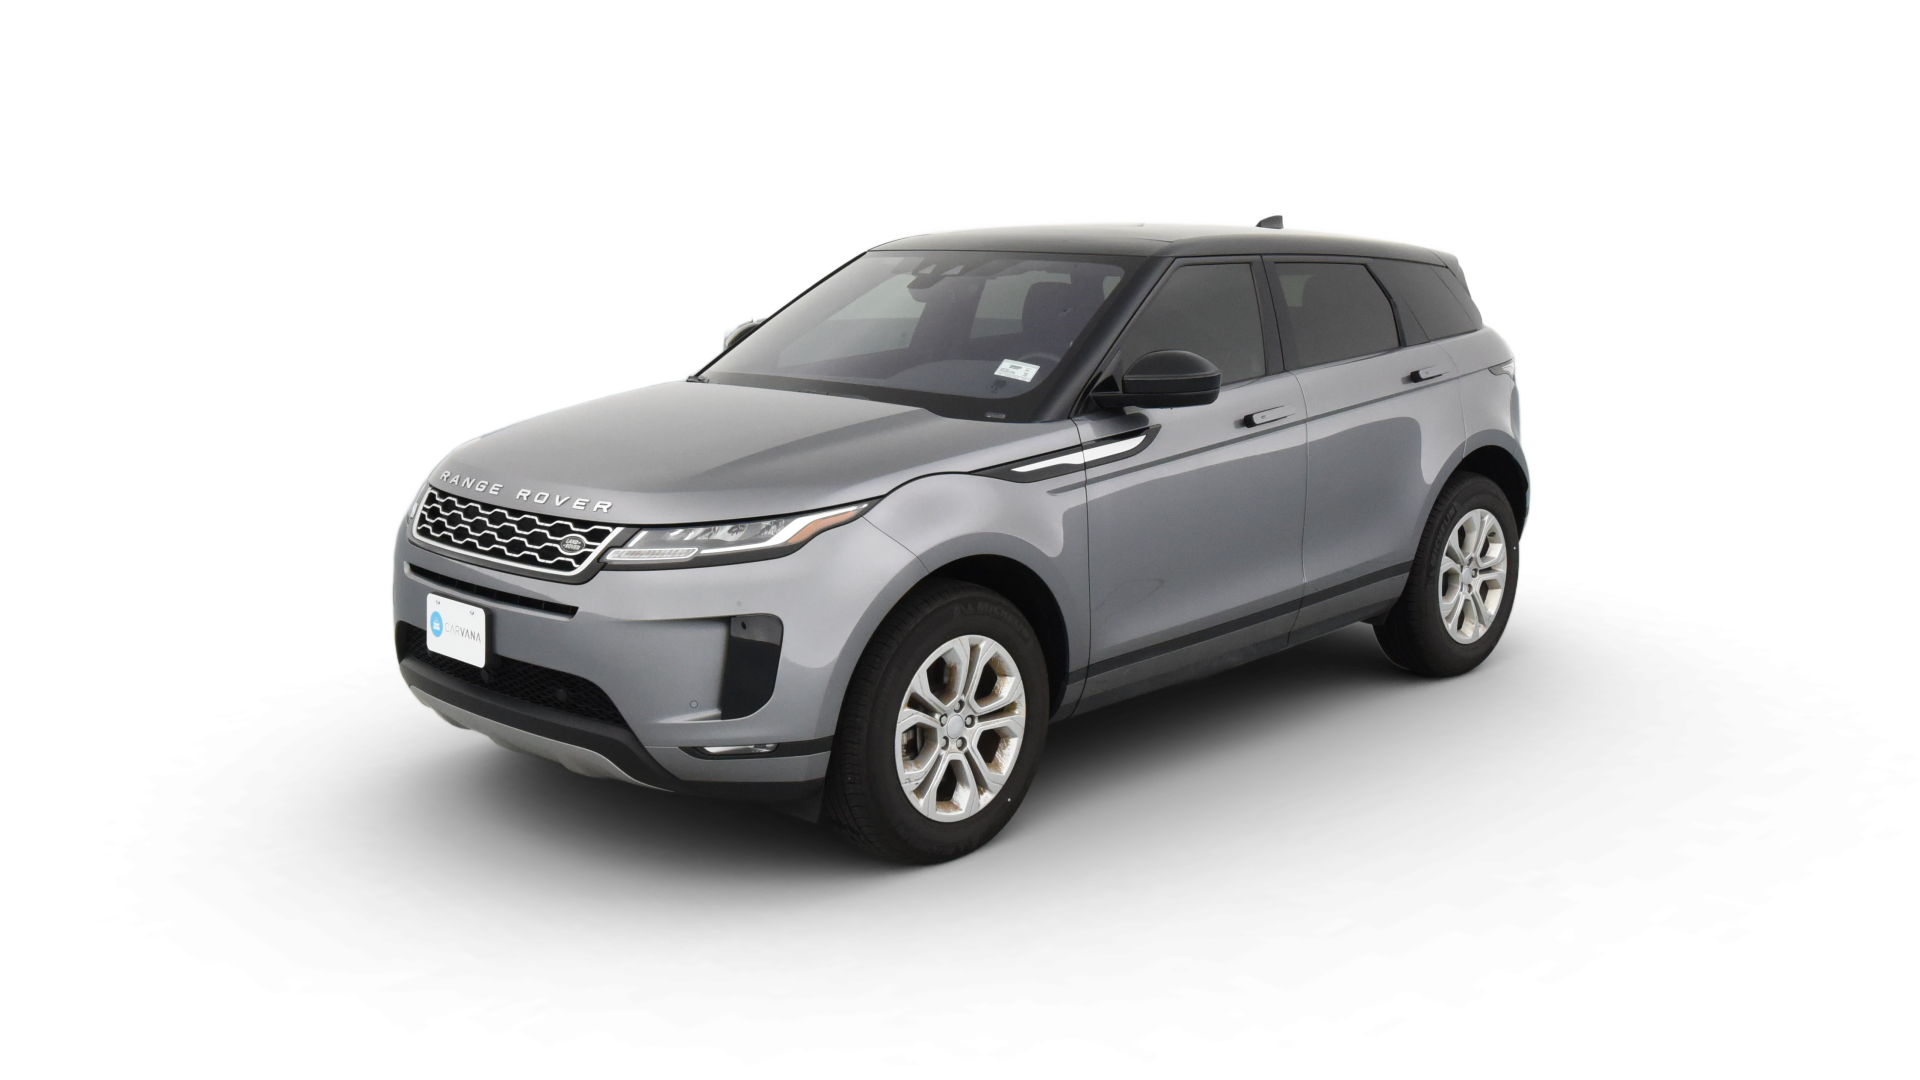 Used Land Rover Range Rover Evoque for Sale Online